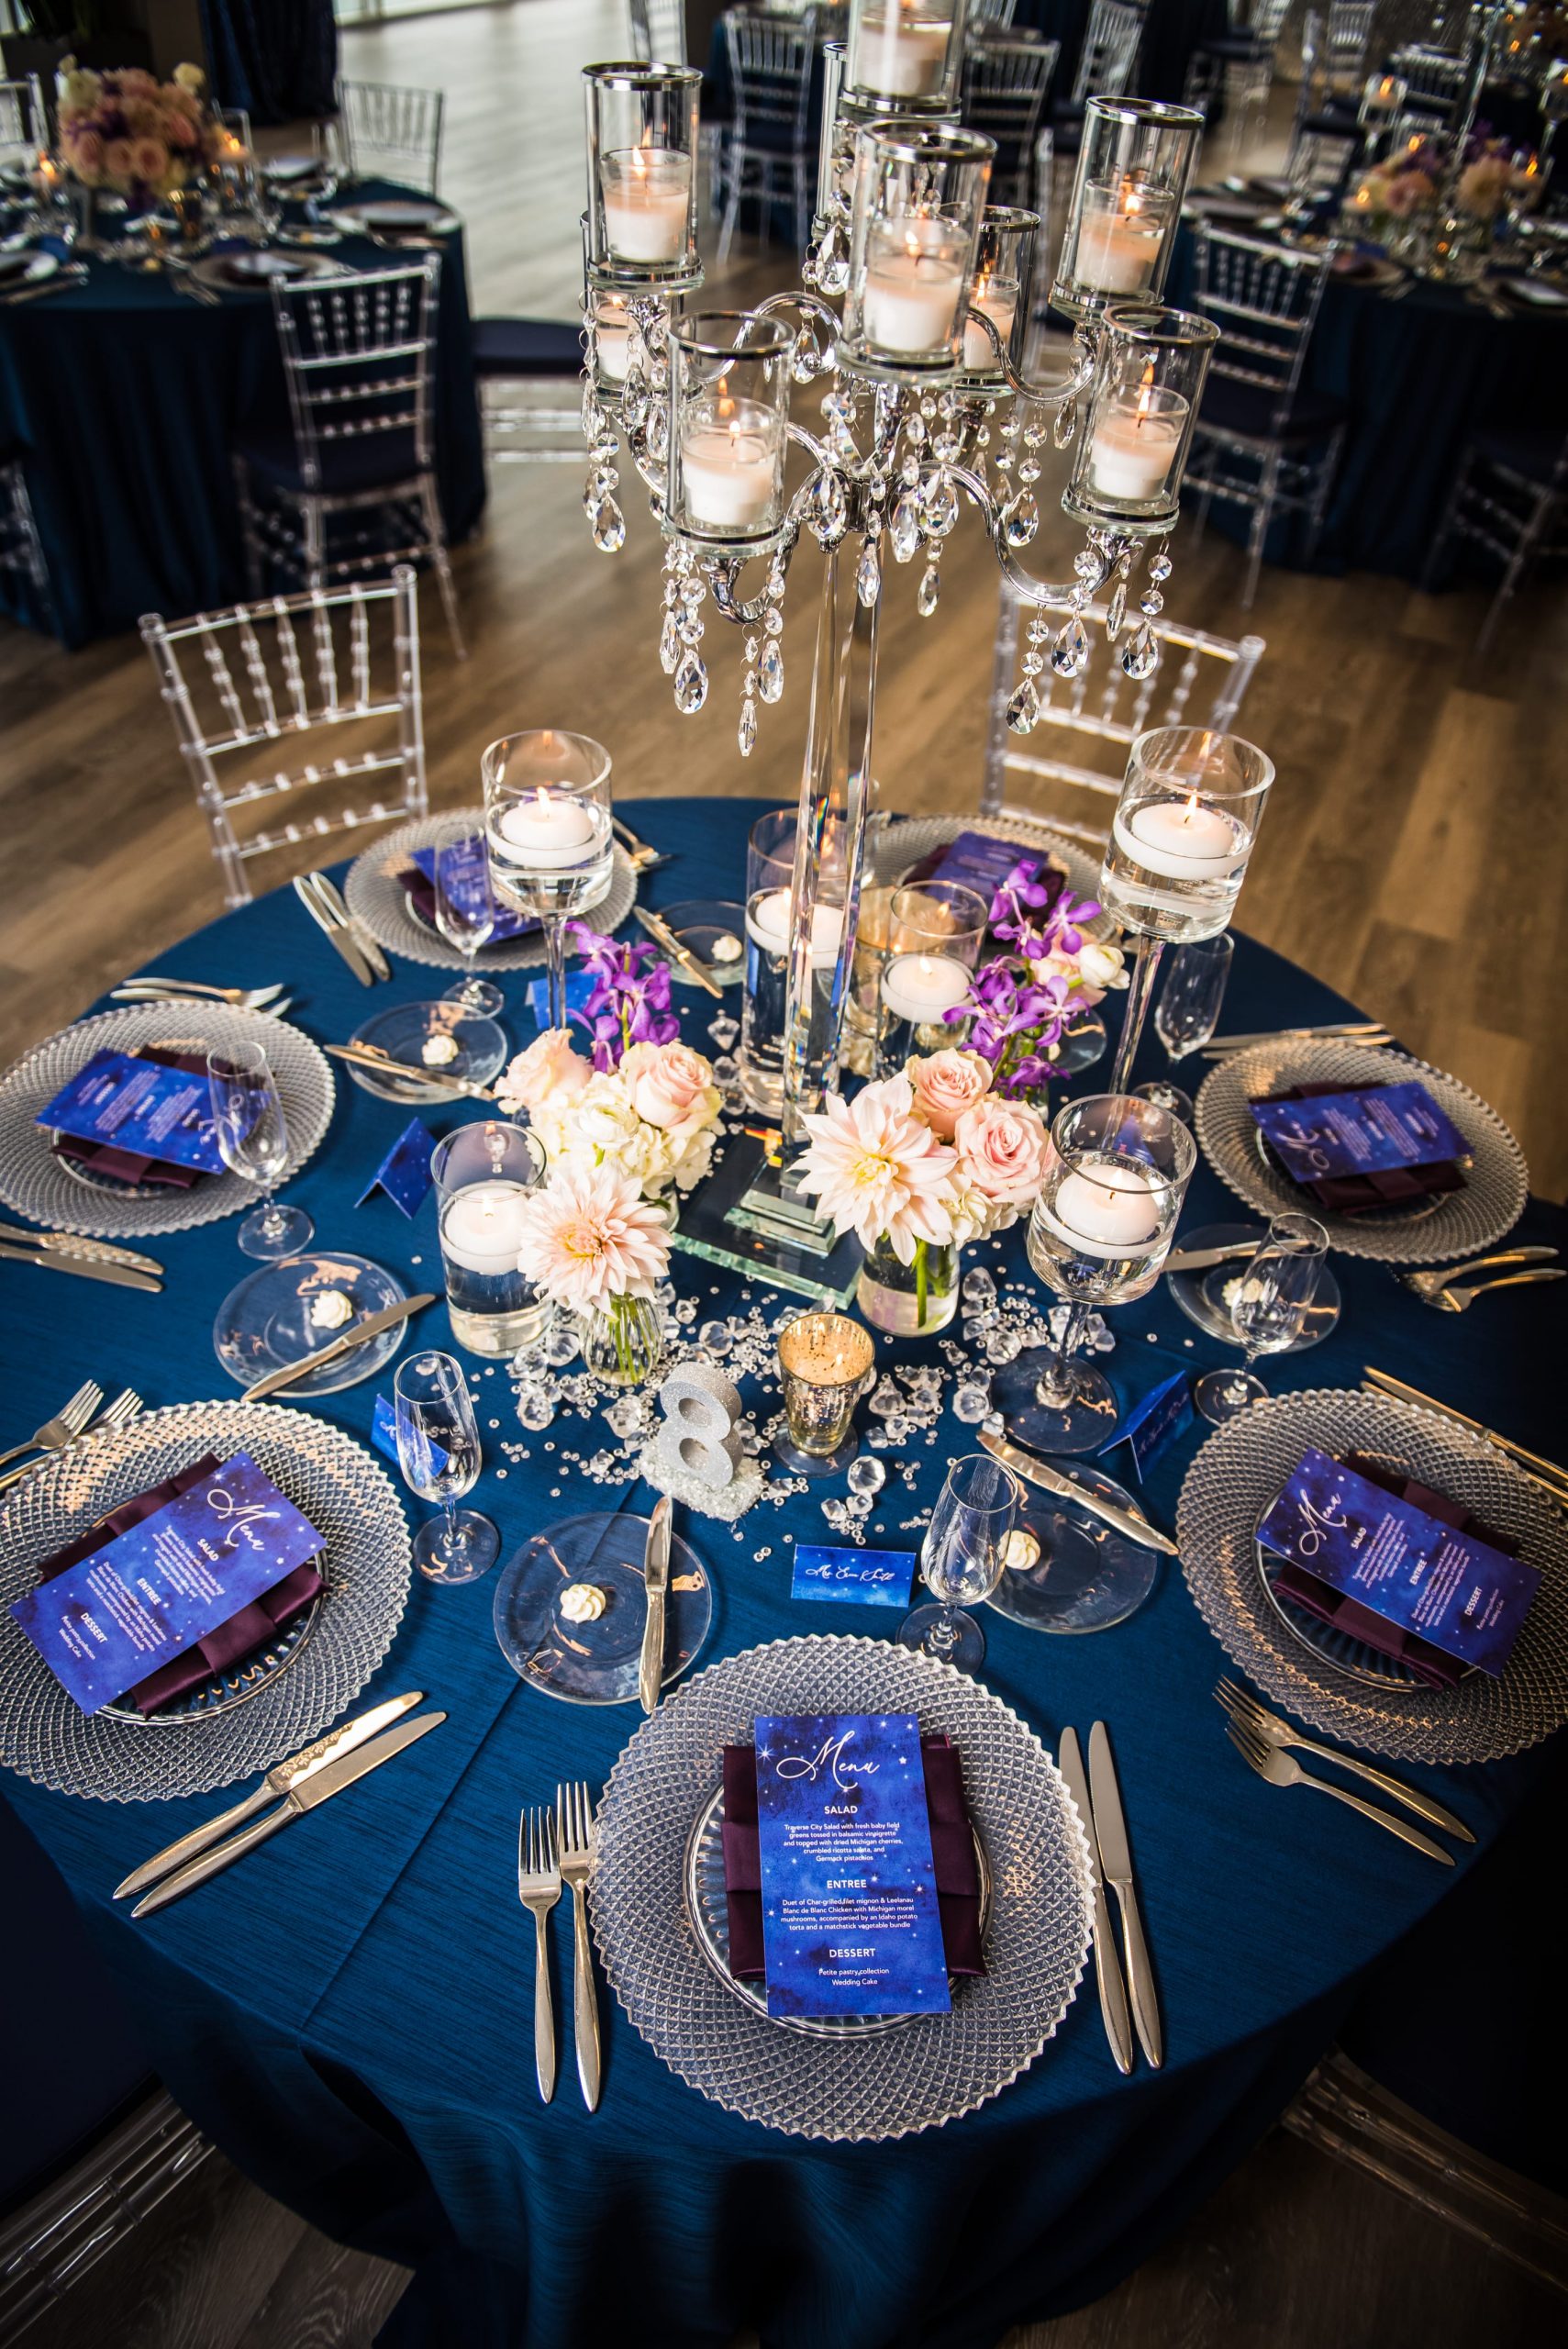 starry wedding reception table details